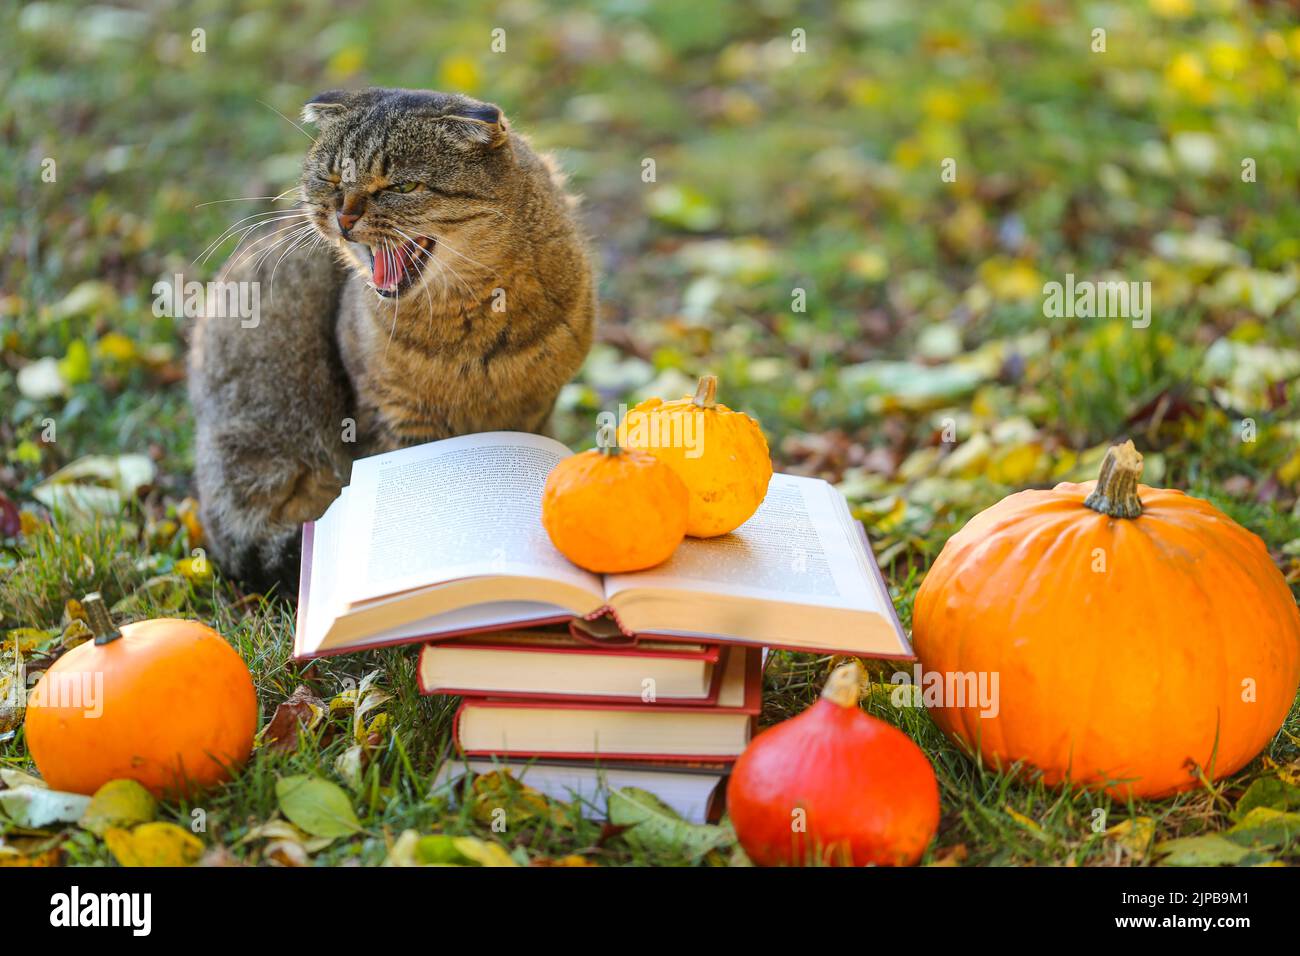 books and cat.Books, pumpkins set, autumn leaves and emotional cat in the autumn garden.Back to school. Scientist cat. Emotions of a cat.Autumn Stock Photo